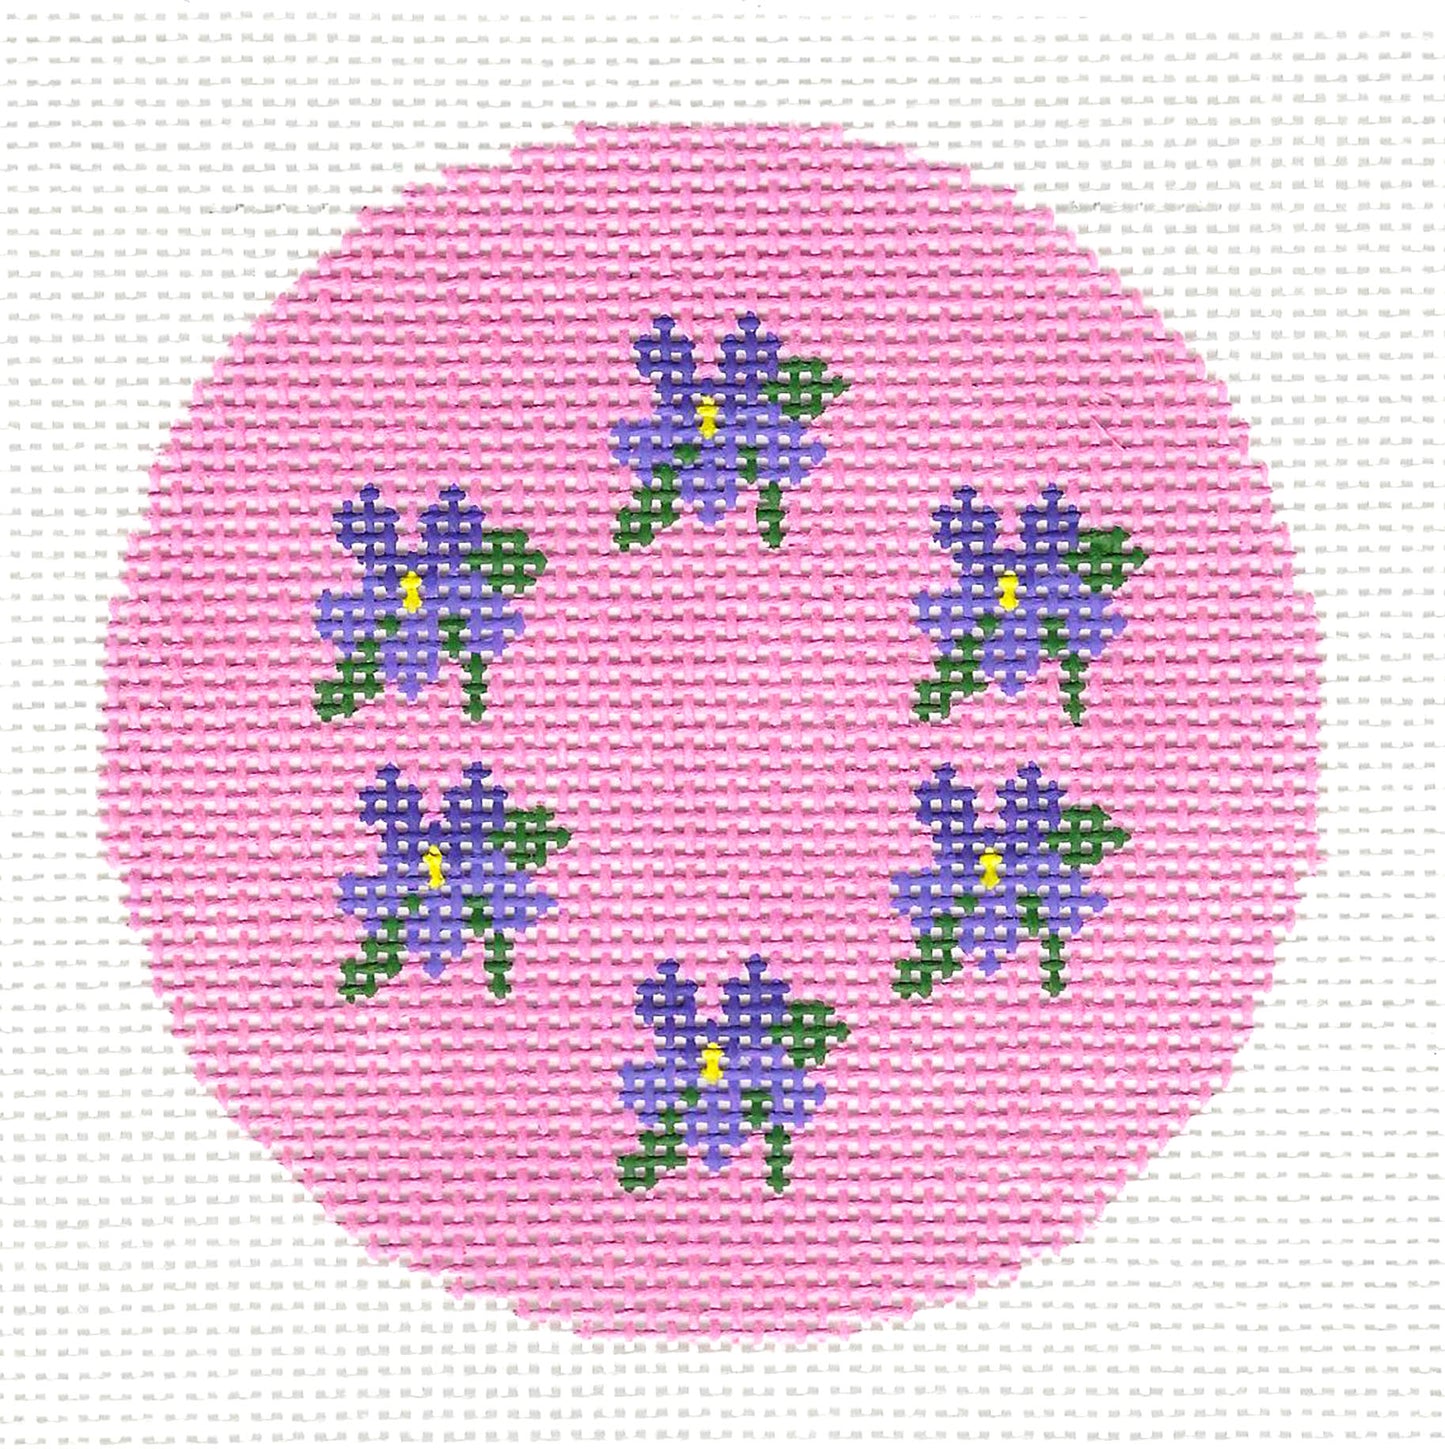 3" Round Floral ~ Circle of Violets on a Pink Background handpainted Needlepoint Canvas Ornament or Insert  ~ 3" Rd. by LEE